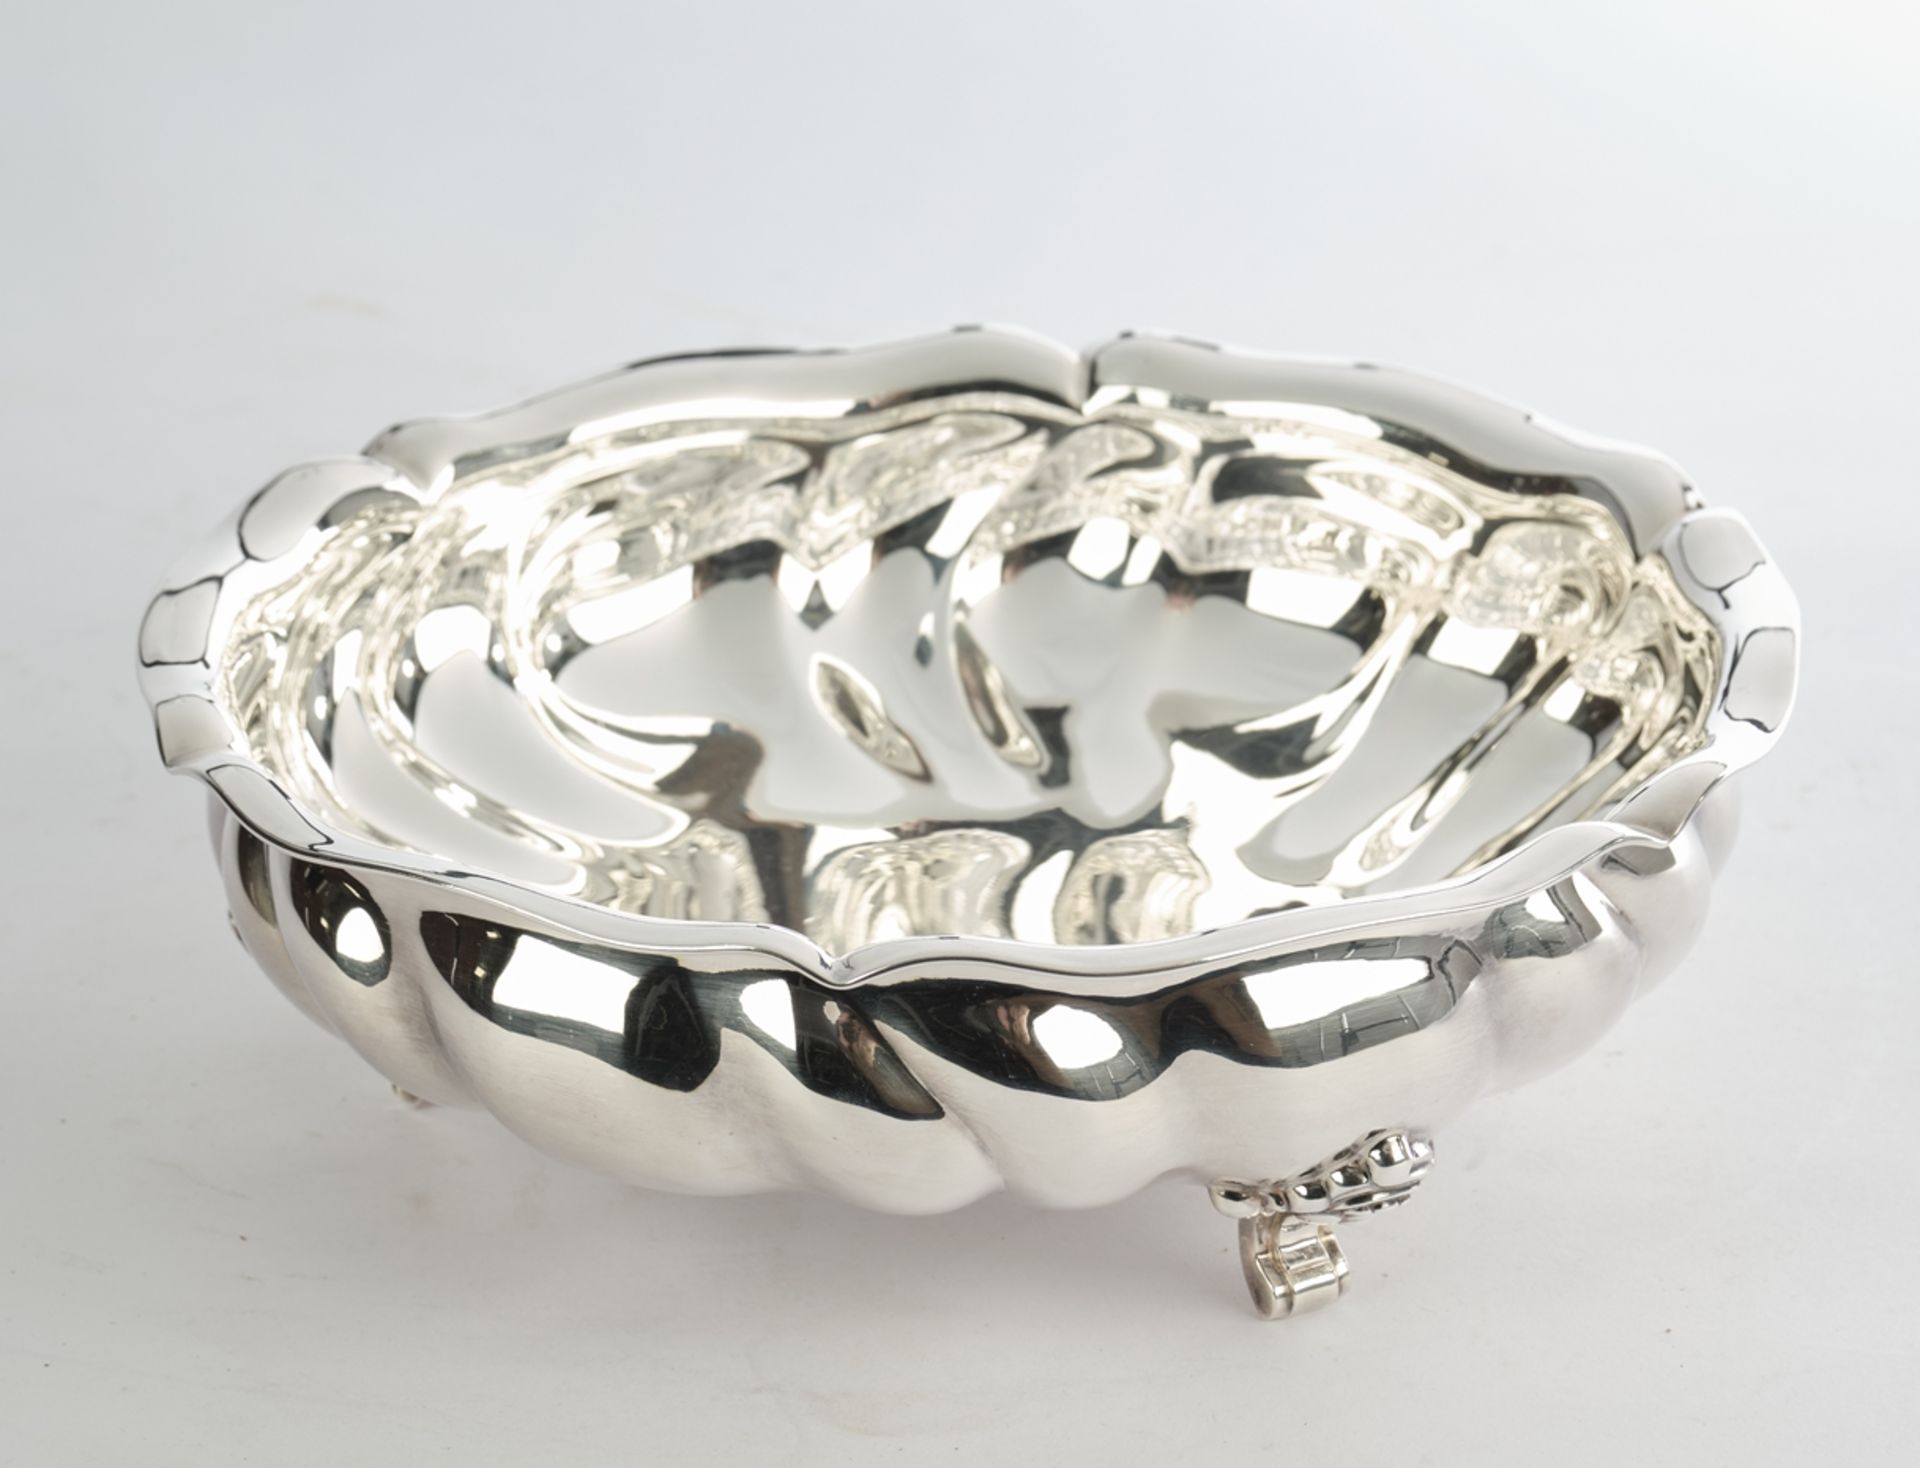 Bowl, silver 925, Wilhelm Binder, fitted, movable rim, wall with twisted features, on three feet, 7